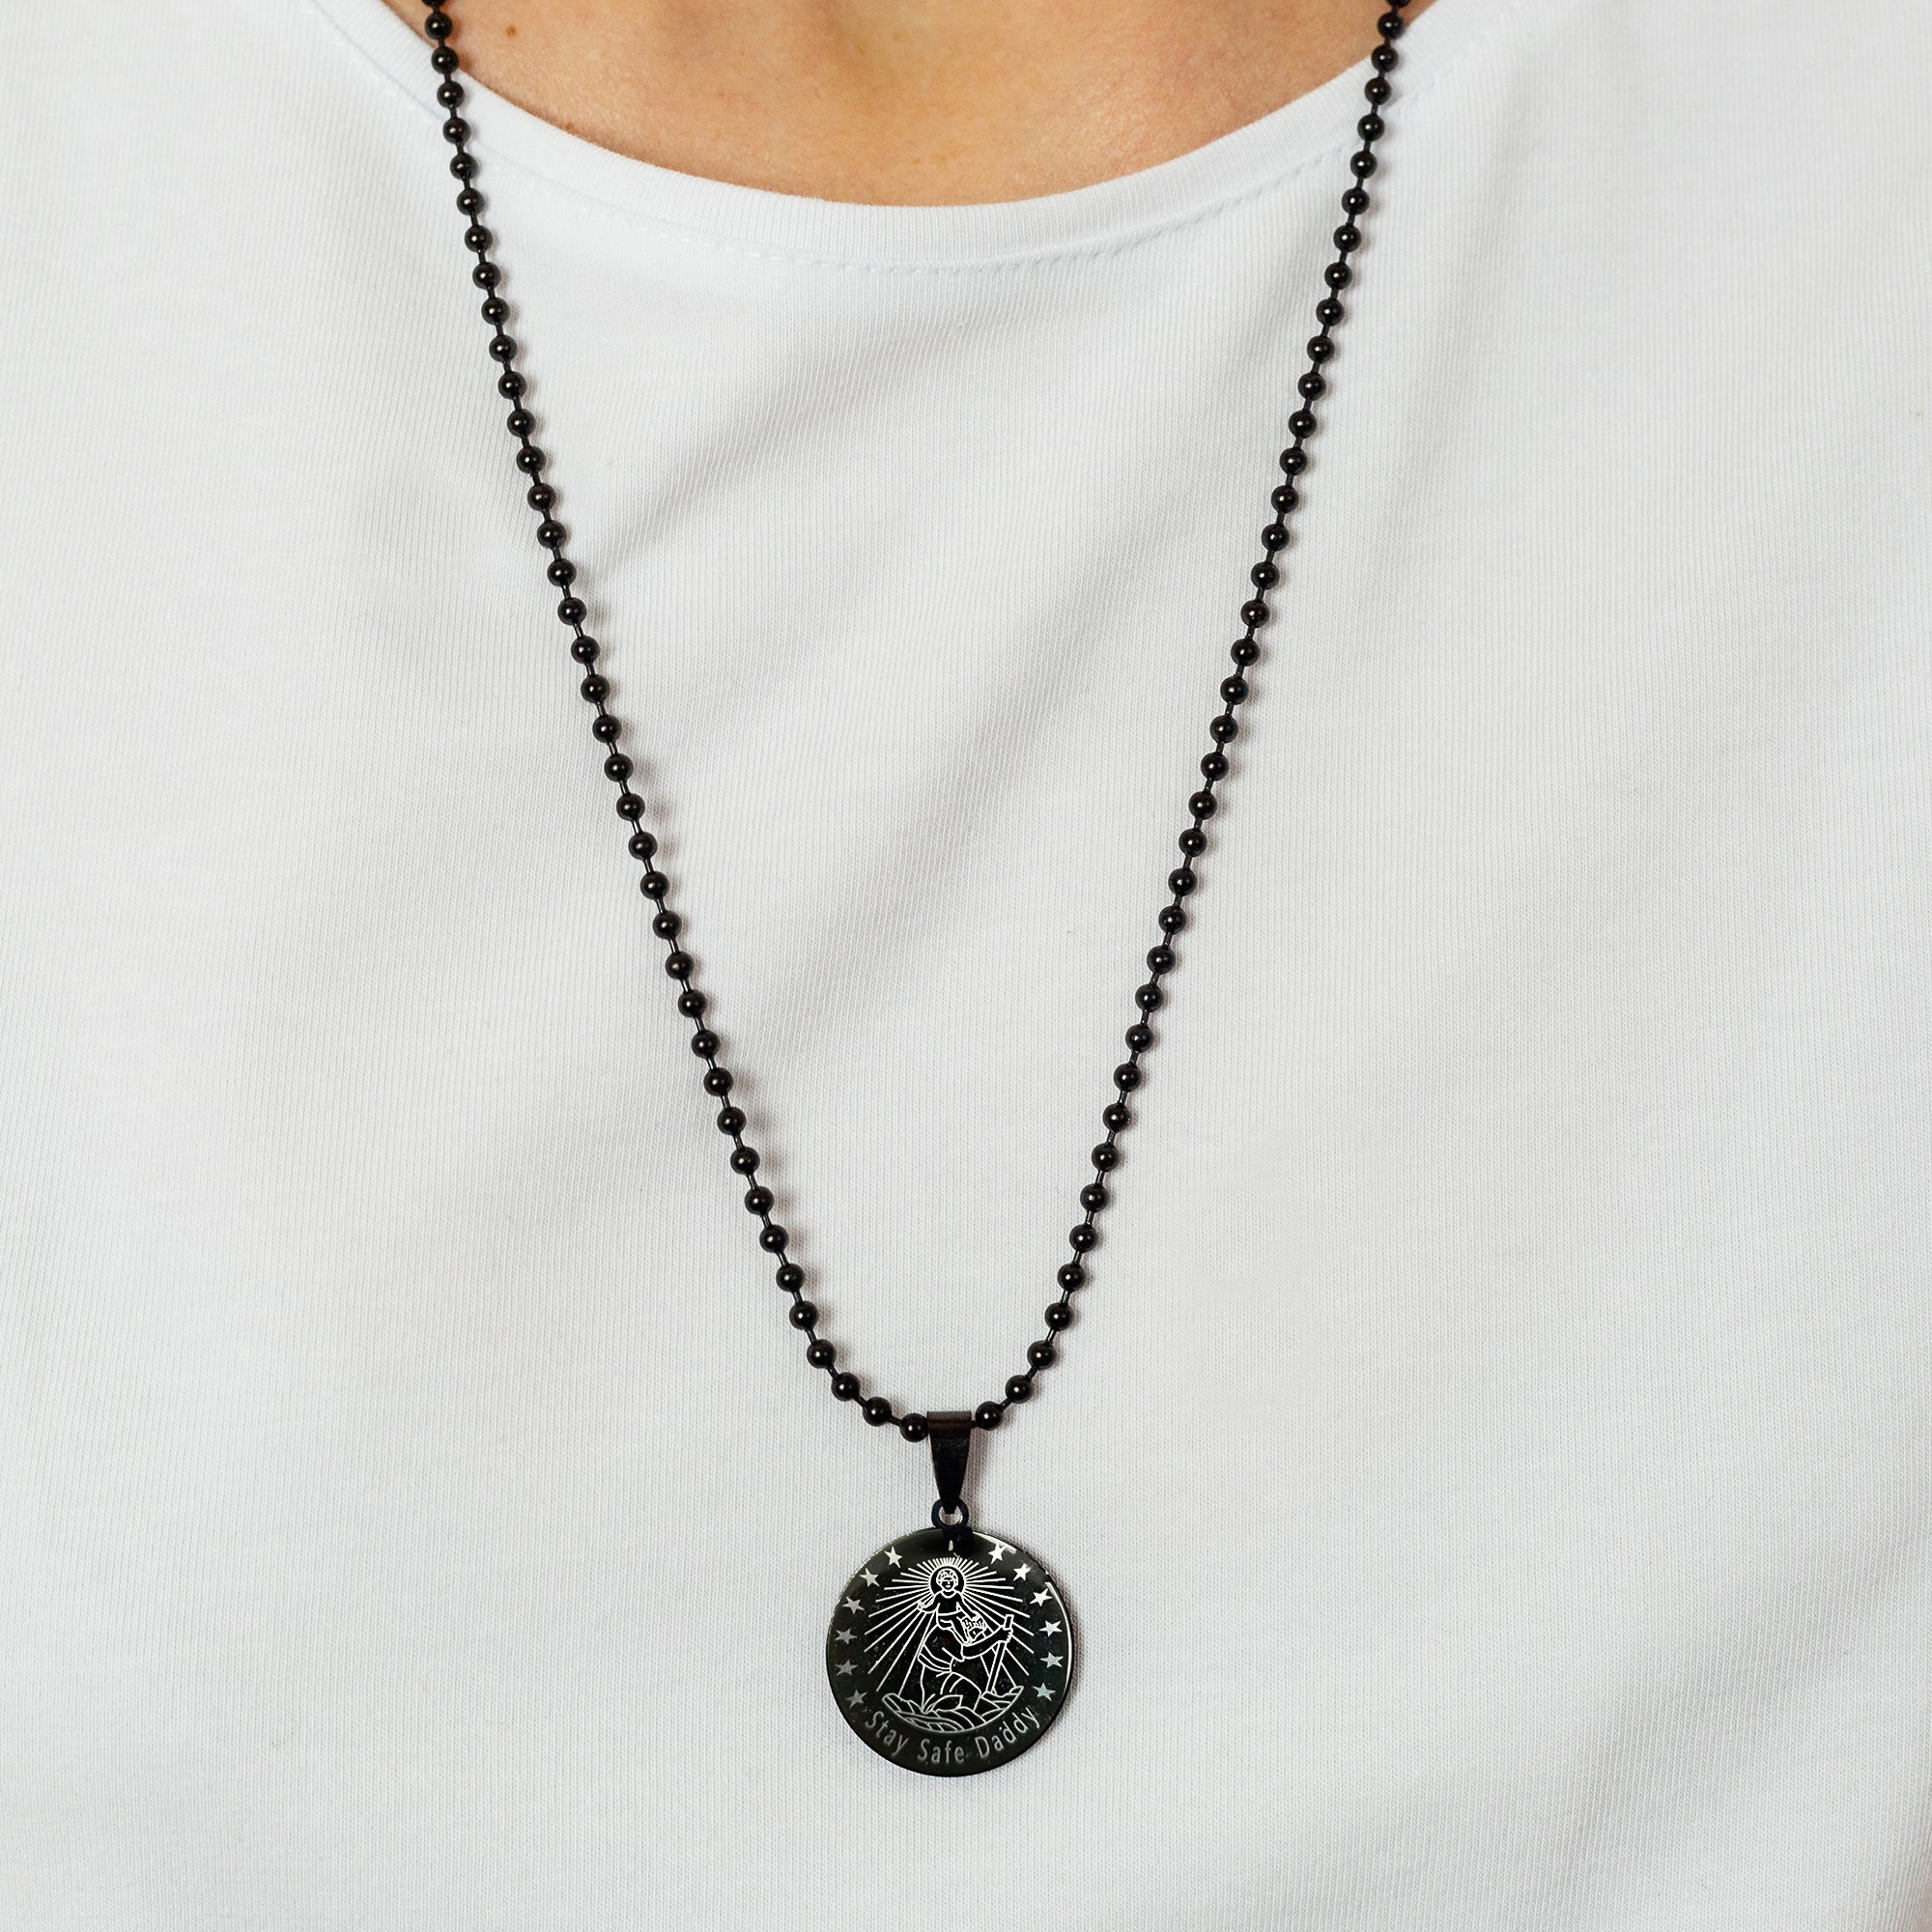 black steel mens saint christopher necklace cheap gift for someone going travelling off the map jewellery hove UK